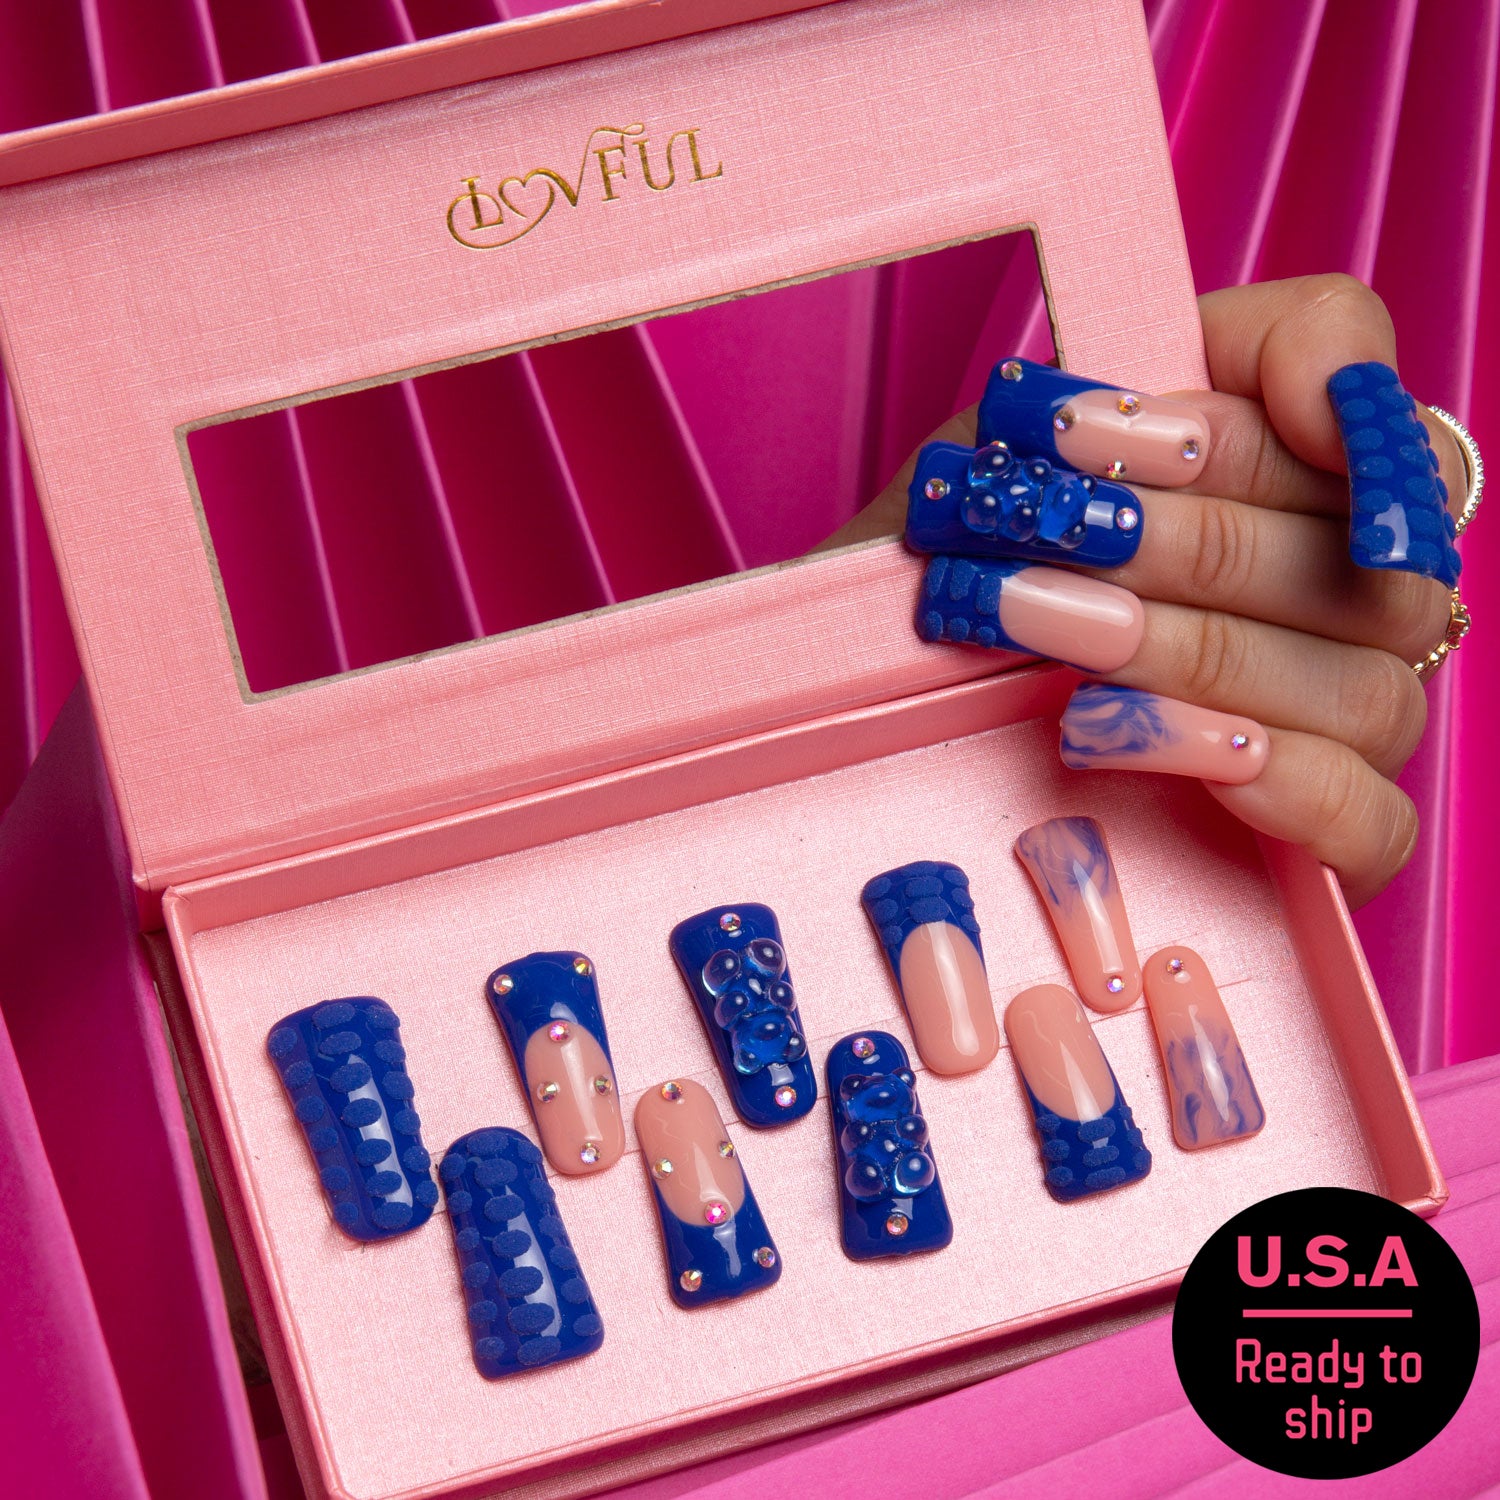 Lovful Little Blue Bear press-on nails set in a pink velvet box, featuring blue French tips with rhinestones and gummy bear designs, ready to ship in the U.S.A.